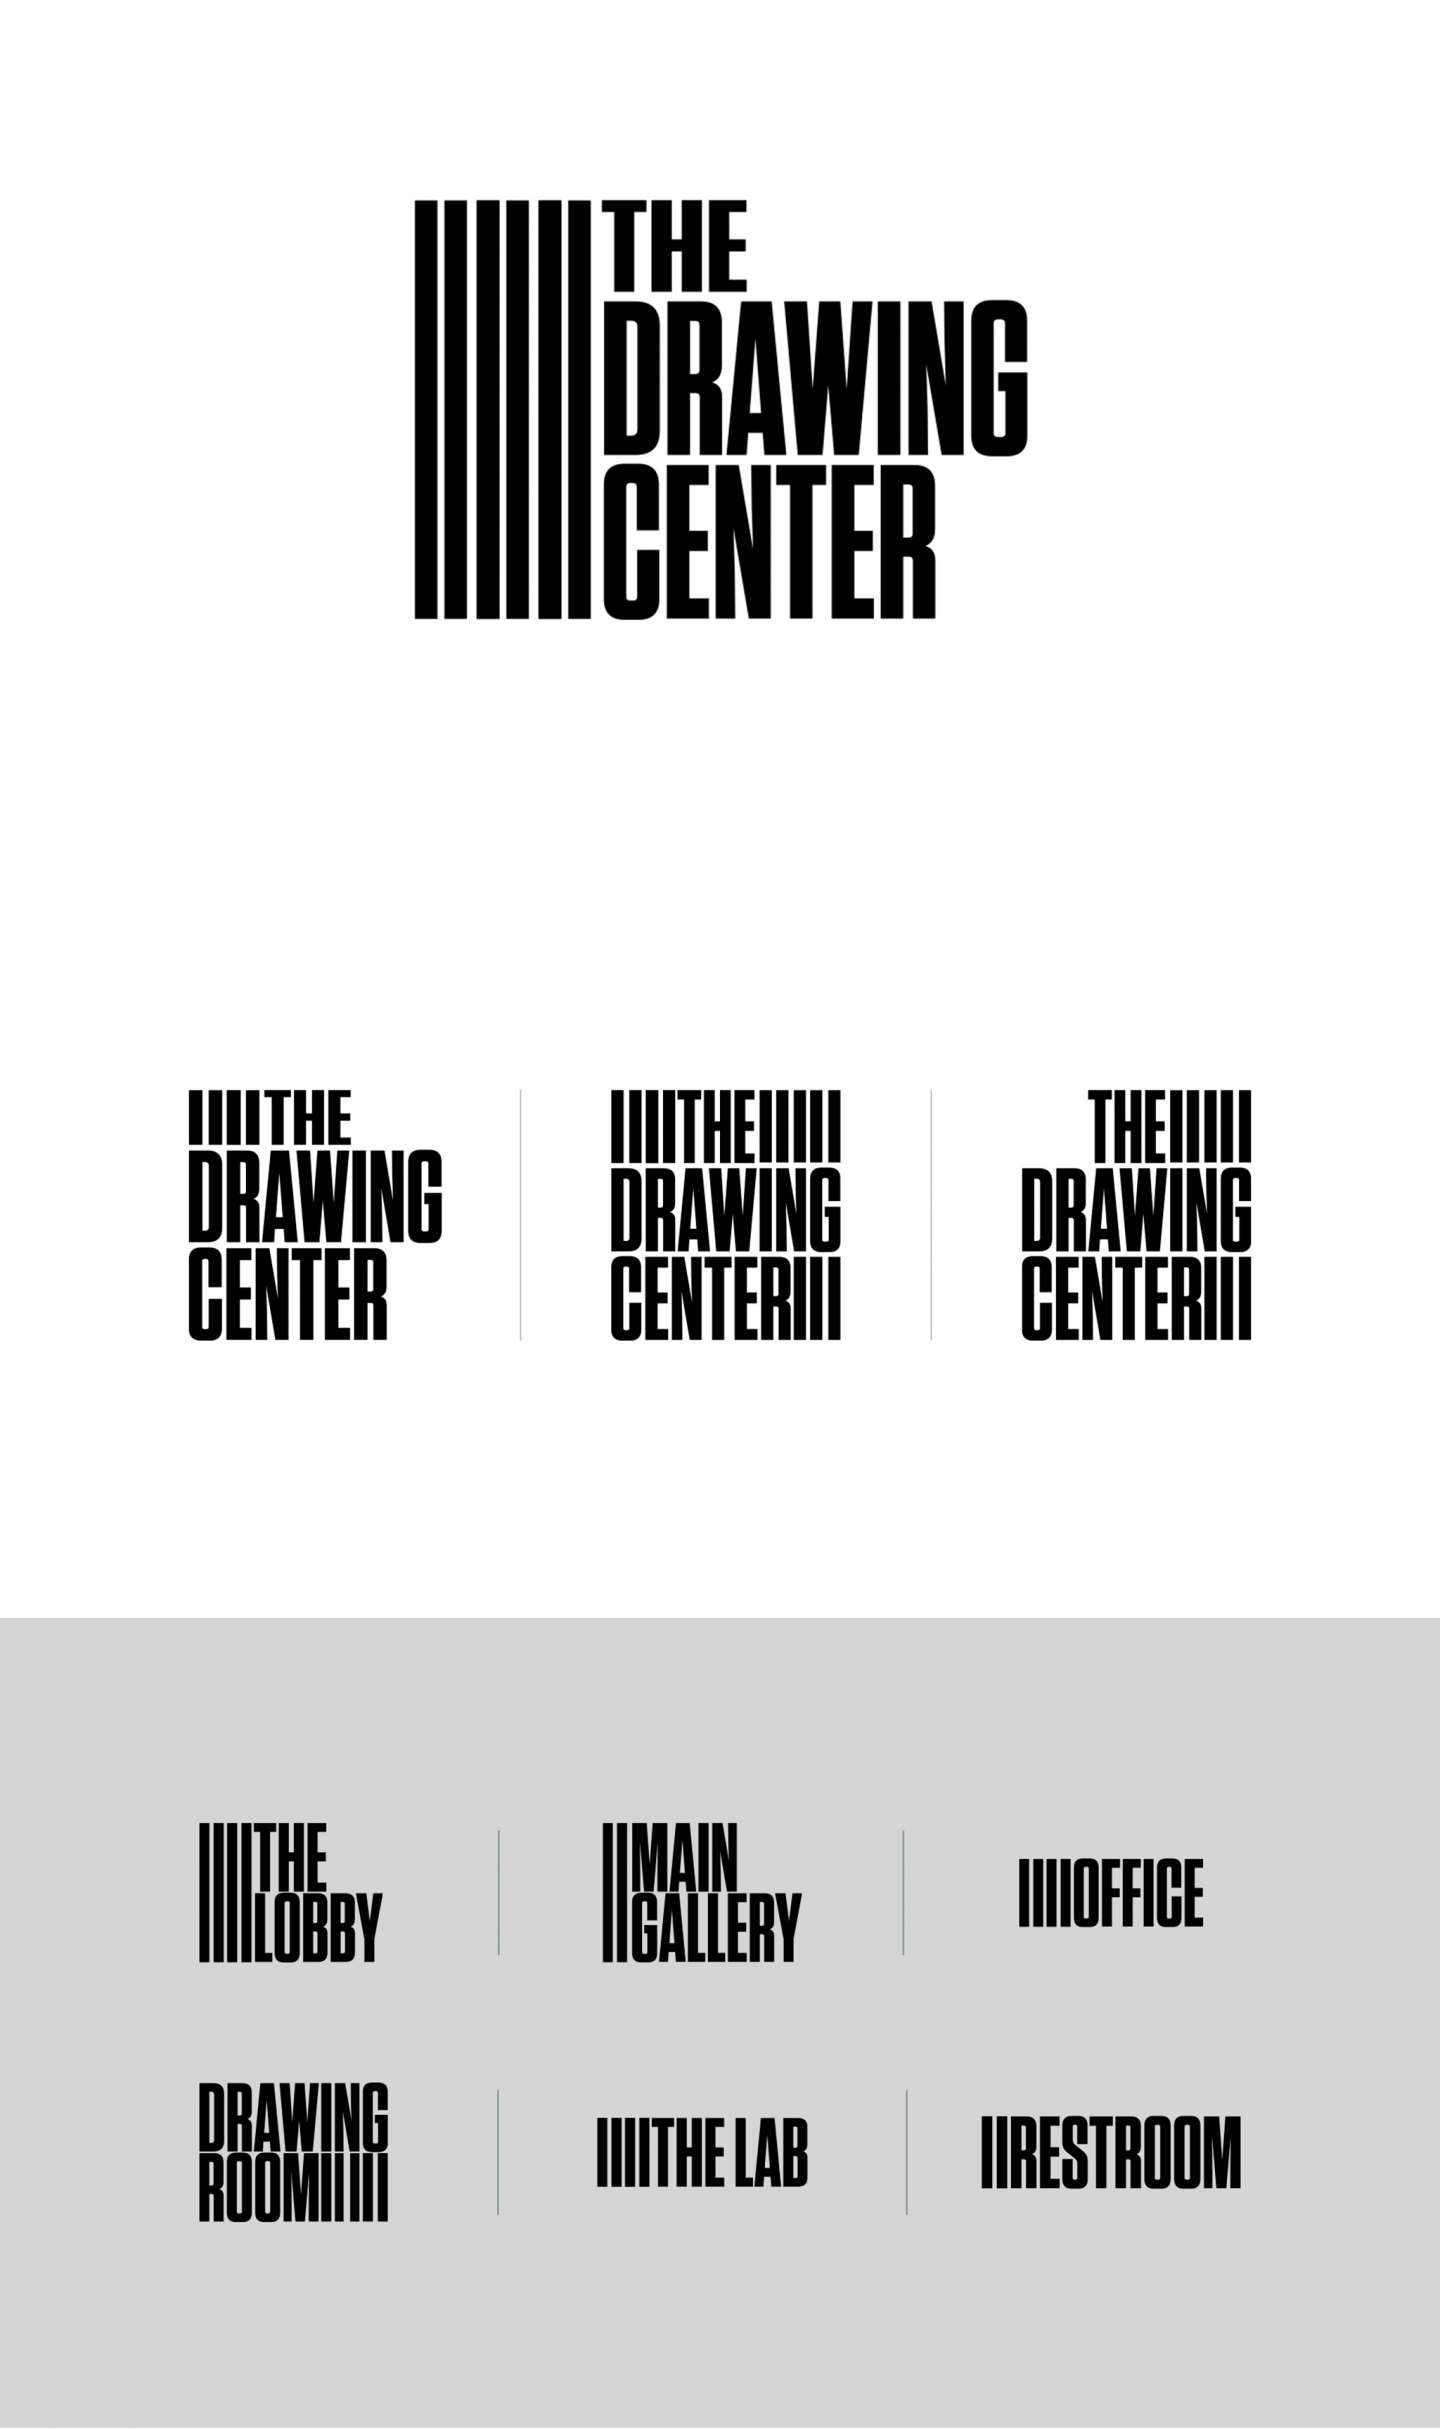 THE DRAWING CENTER